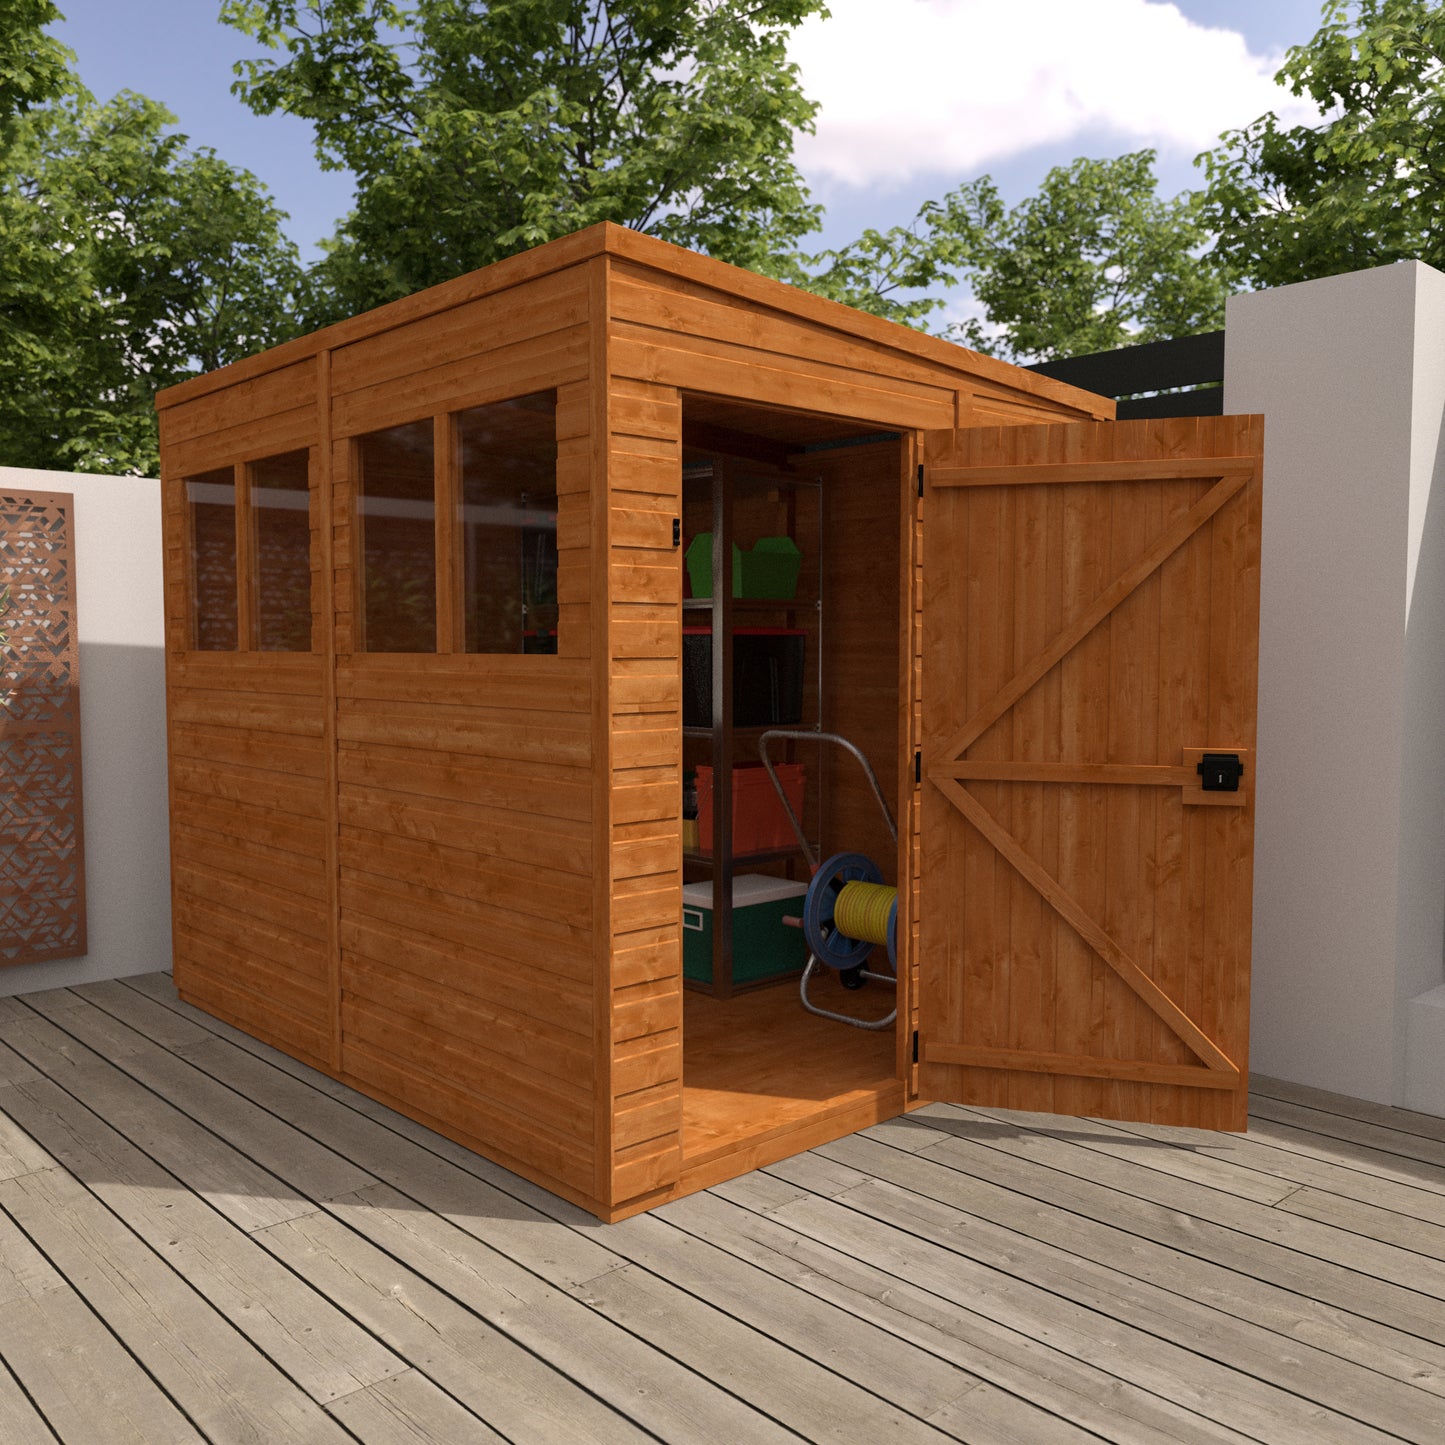 Your Choice Pent Wooden Garden Shed - Various Sizes Available